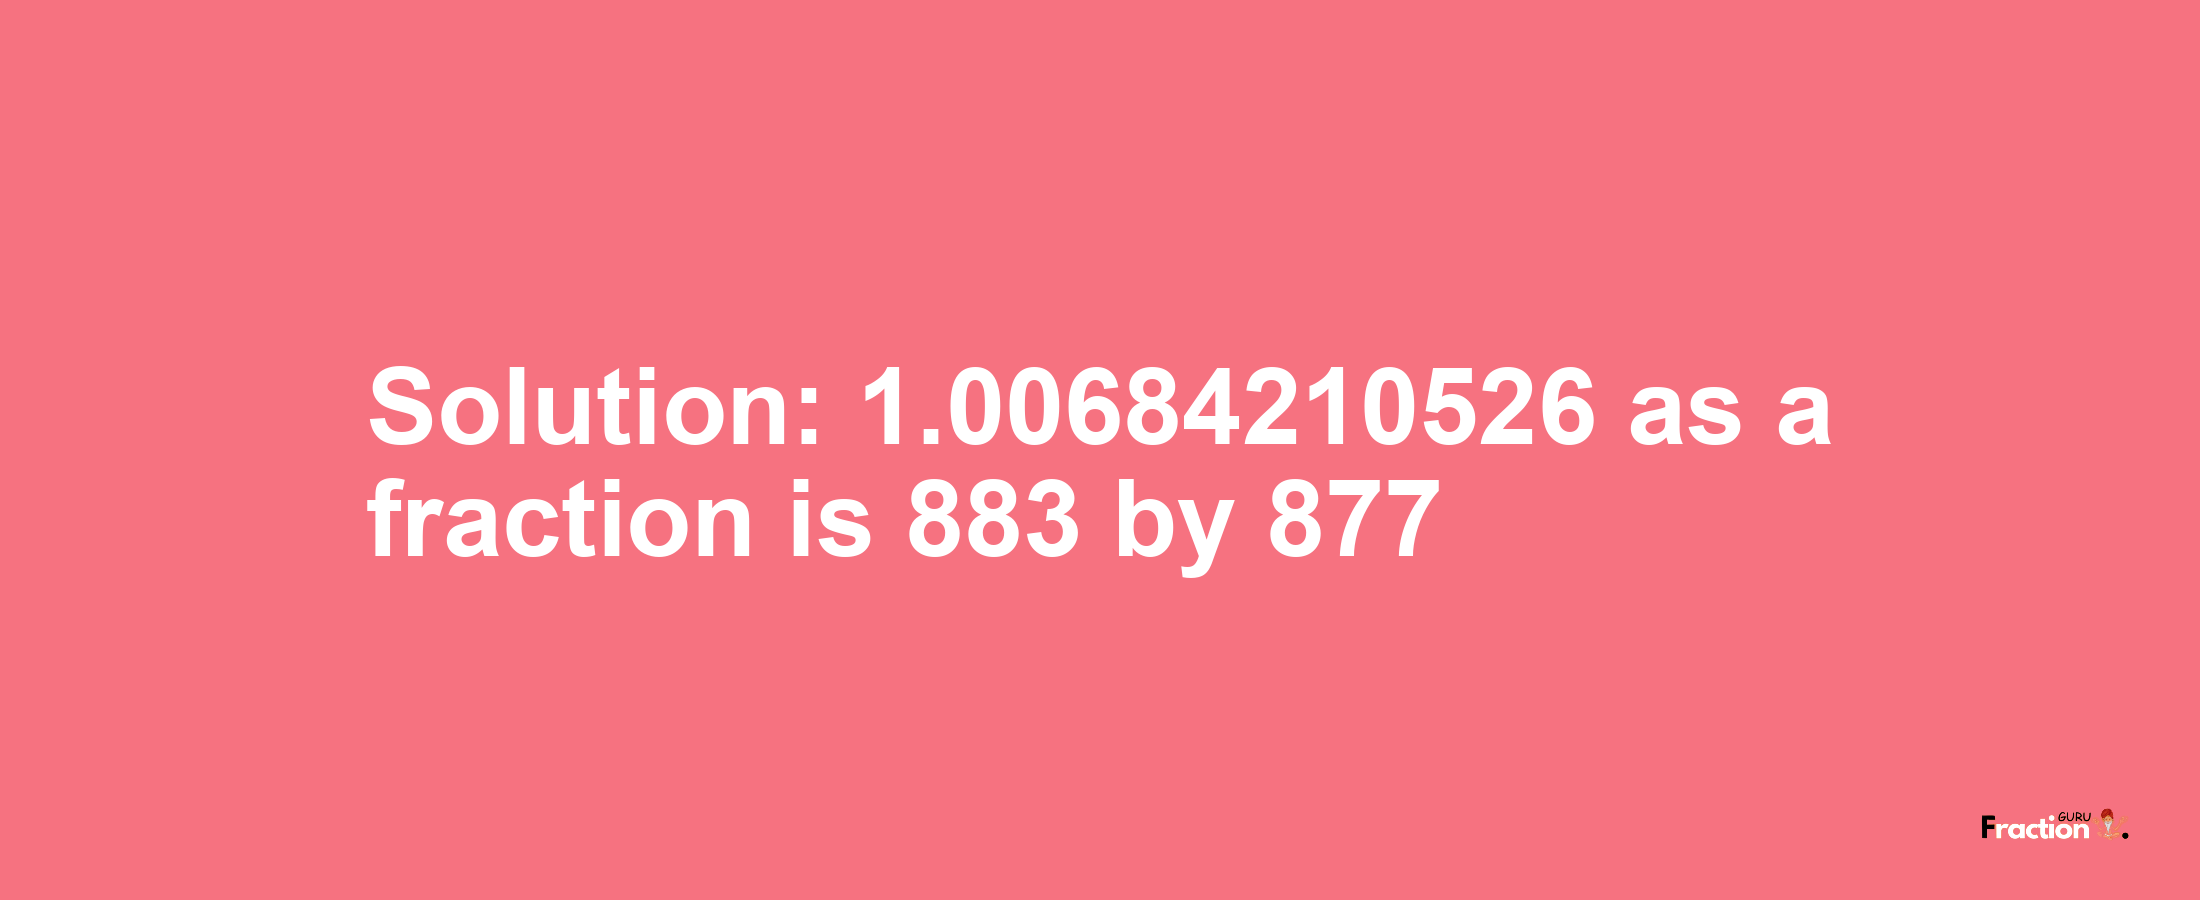 Solution:1.00684210526 as a fraction is 883/877